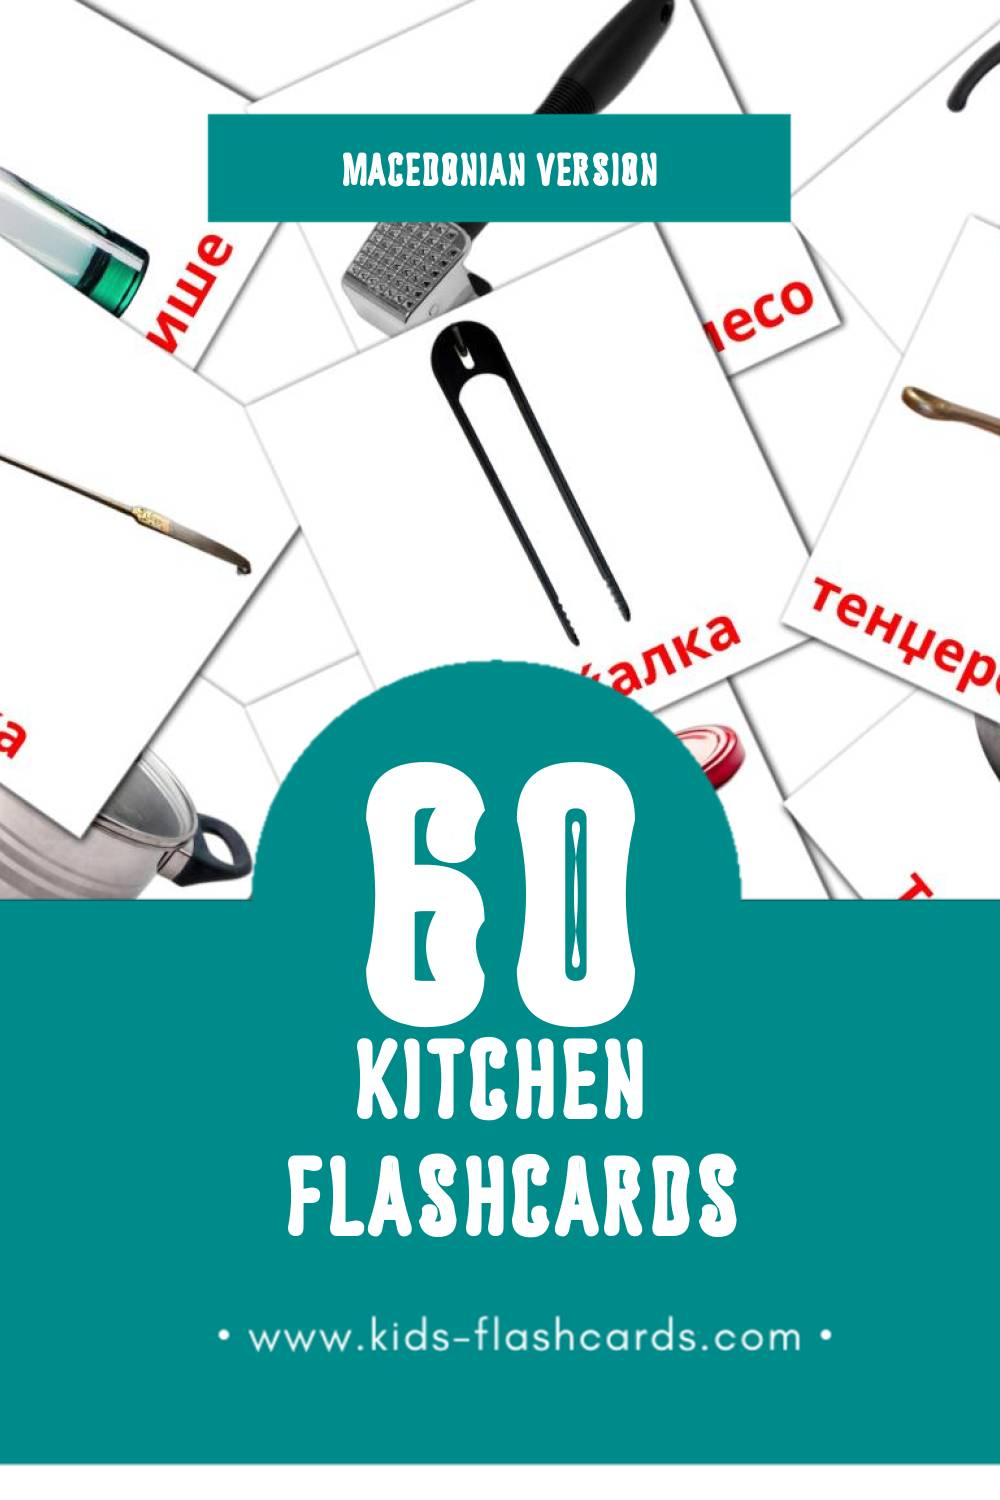 Visual Кујна Flashcards for Toddlers (35 cards in Macedonian)